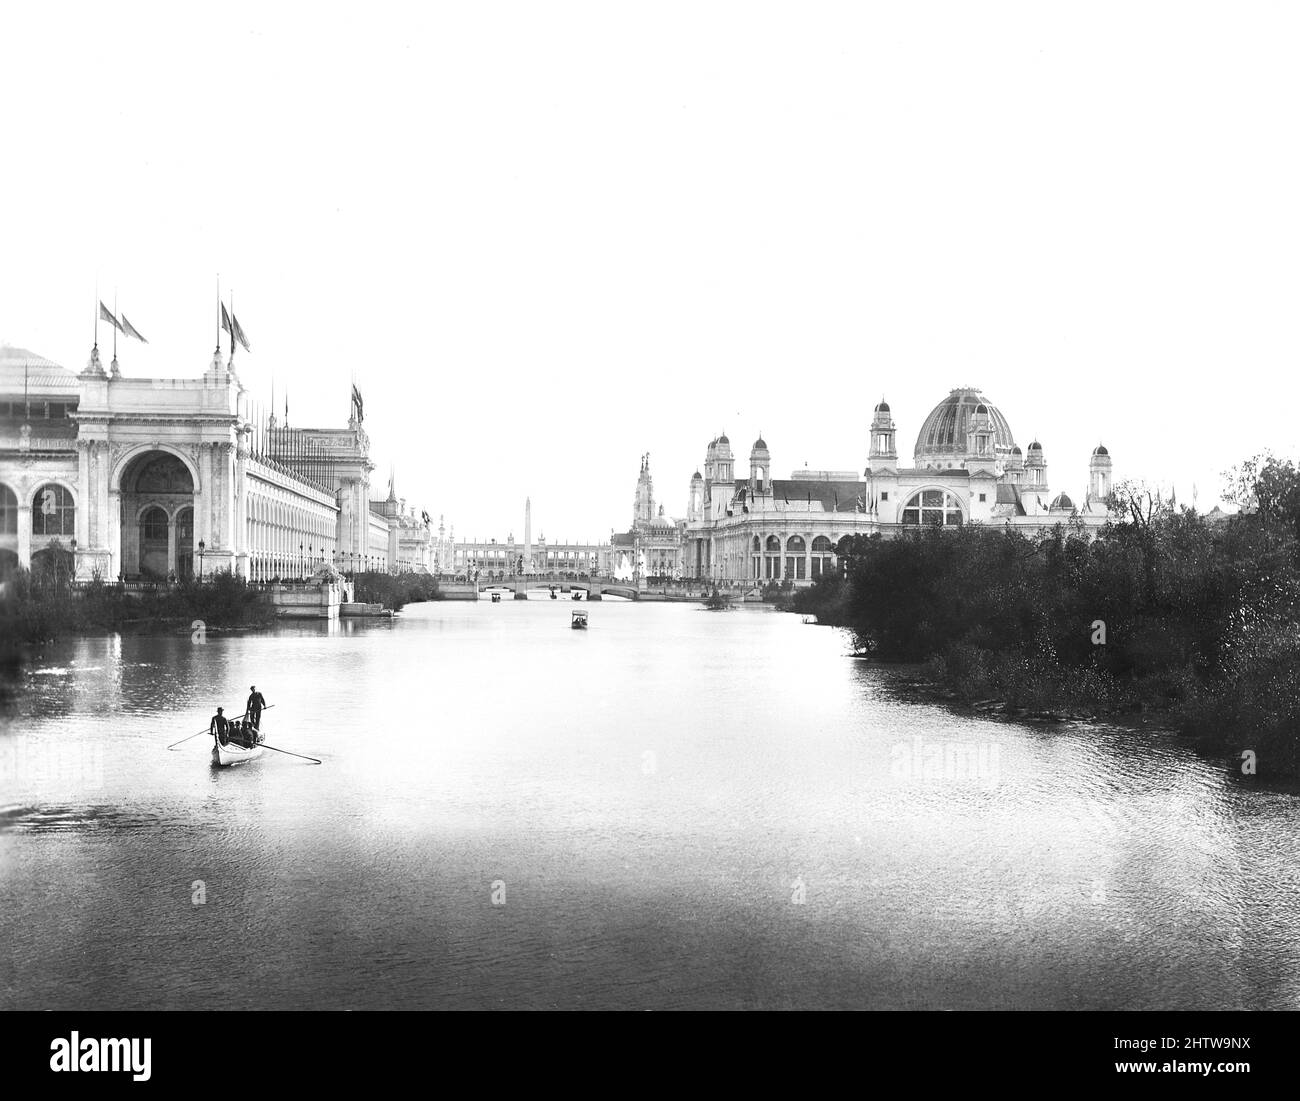 Manufactures and Liberal Arts Building (left), Administration Building (right) and Grand Basin, World's Columbian Exposition, Chicago, Illinois, USA, Frances Benjamin Johnston, 1893 Stock Photo